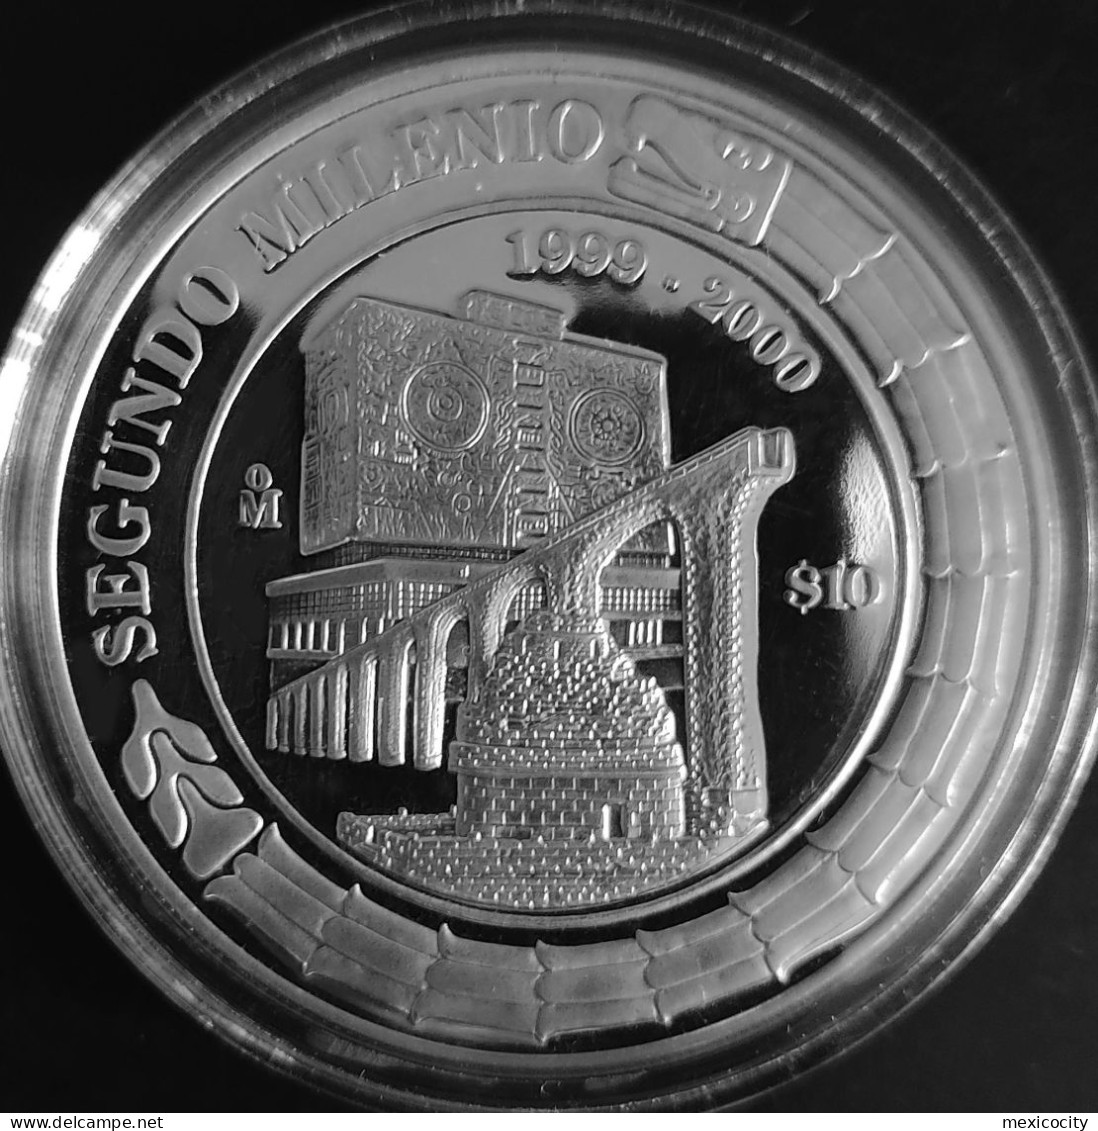 MEXICO 1999 $10 SECOND MILLENNIUM 2 Oz. .999 Silver Coin, PROOF State See Imgs., Nice, Rather Scarce - Mexico